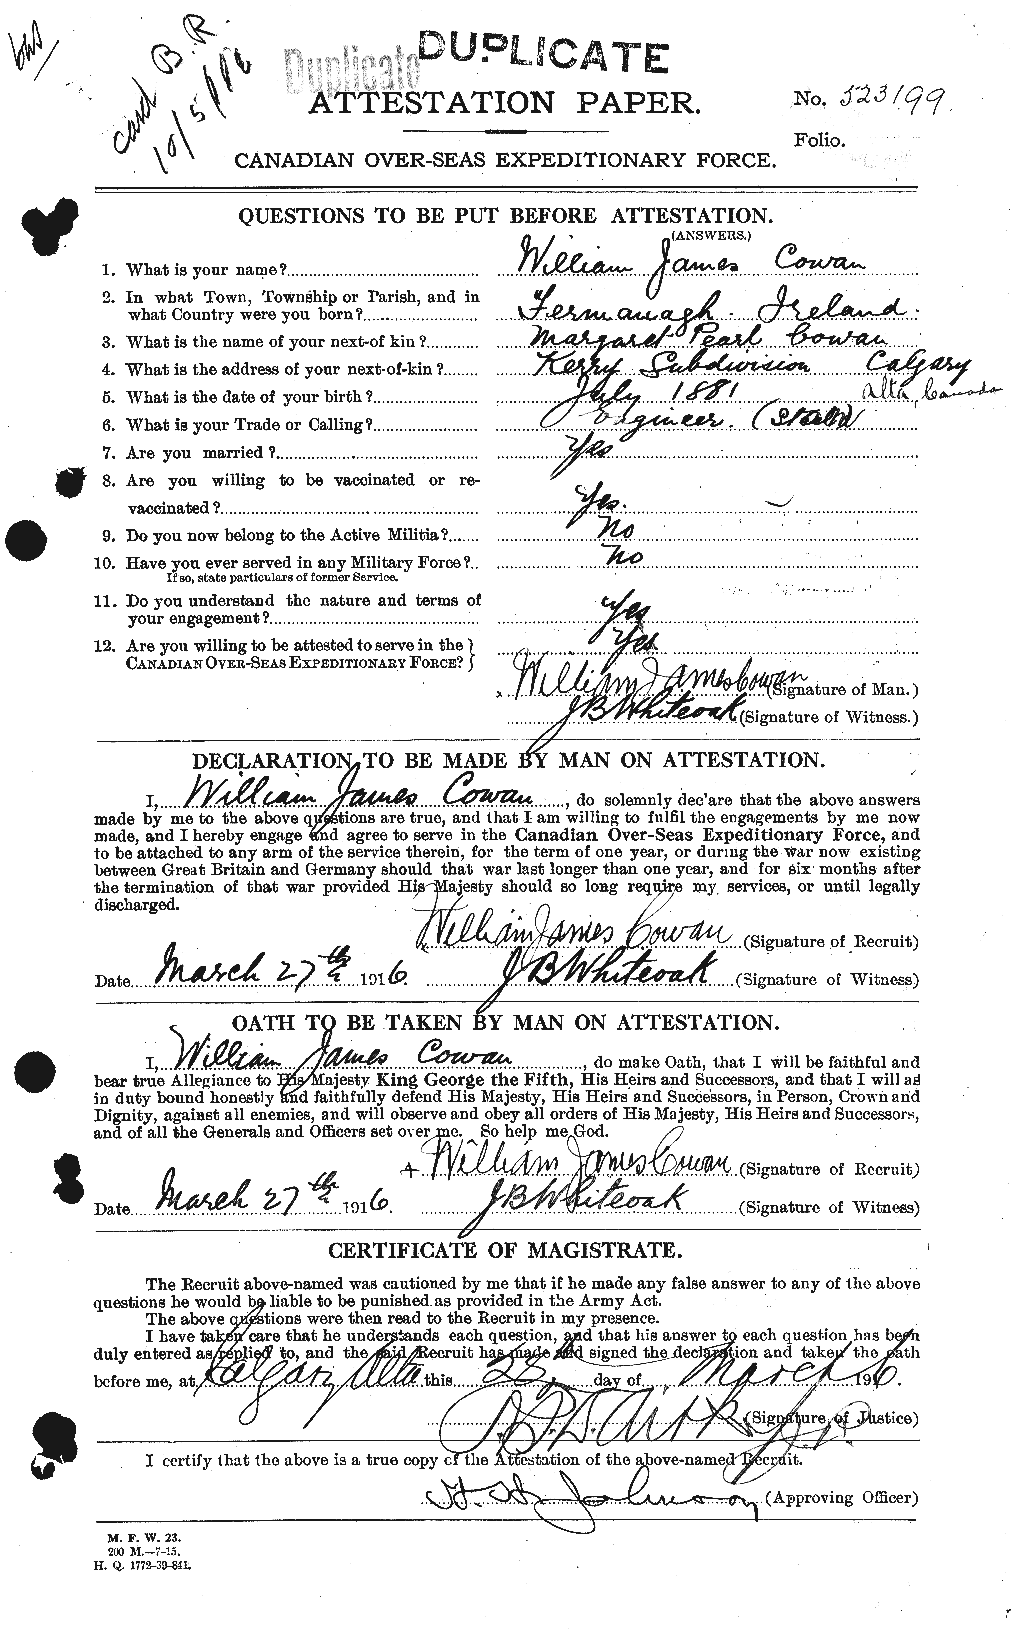 Personnel Records of the First World War - CEF 058287a